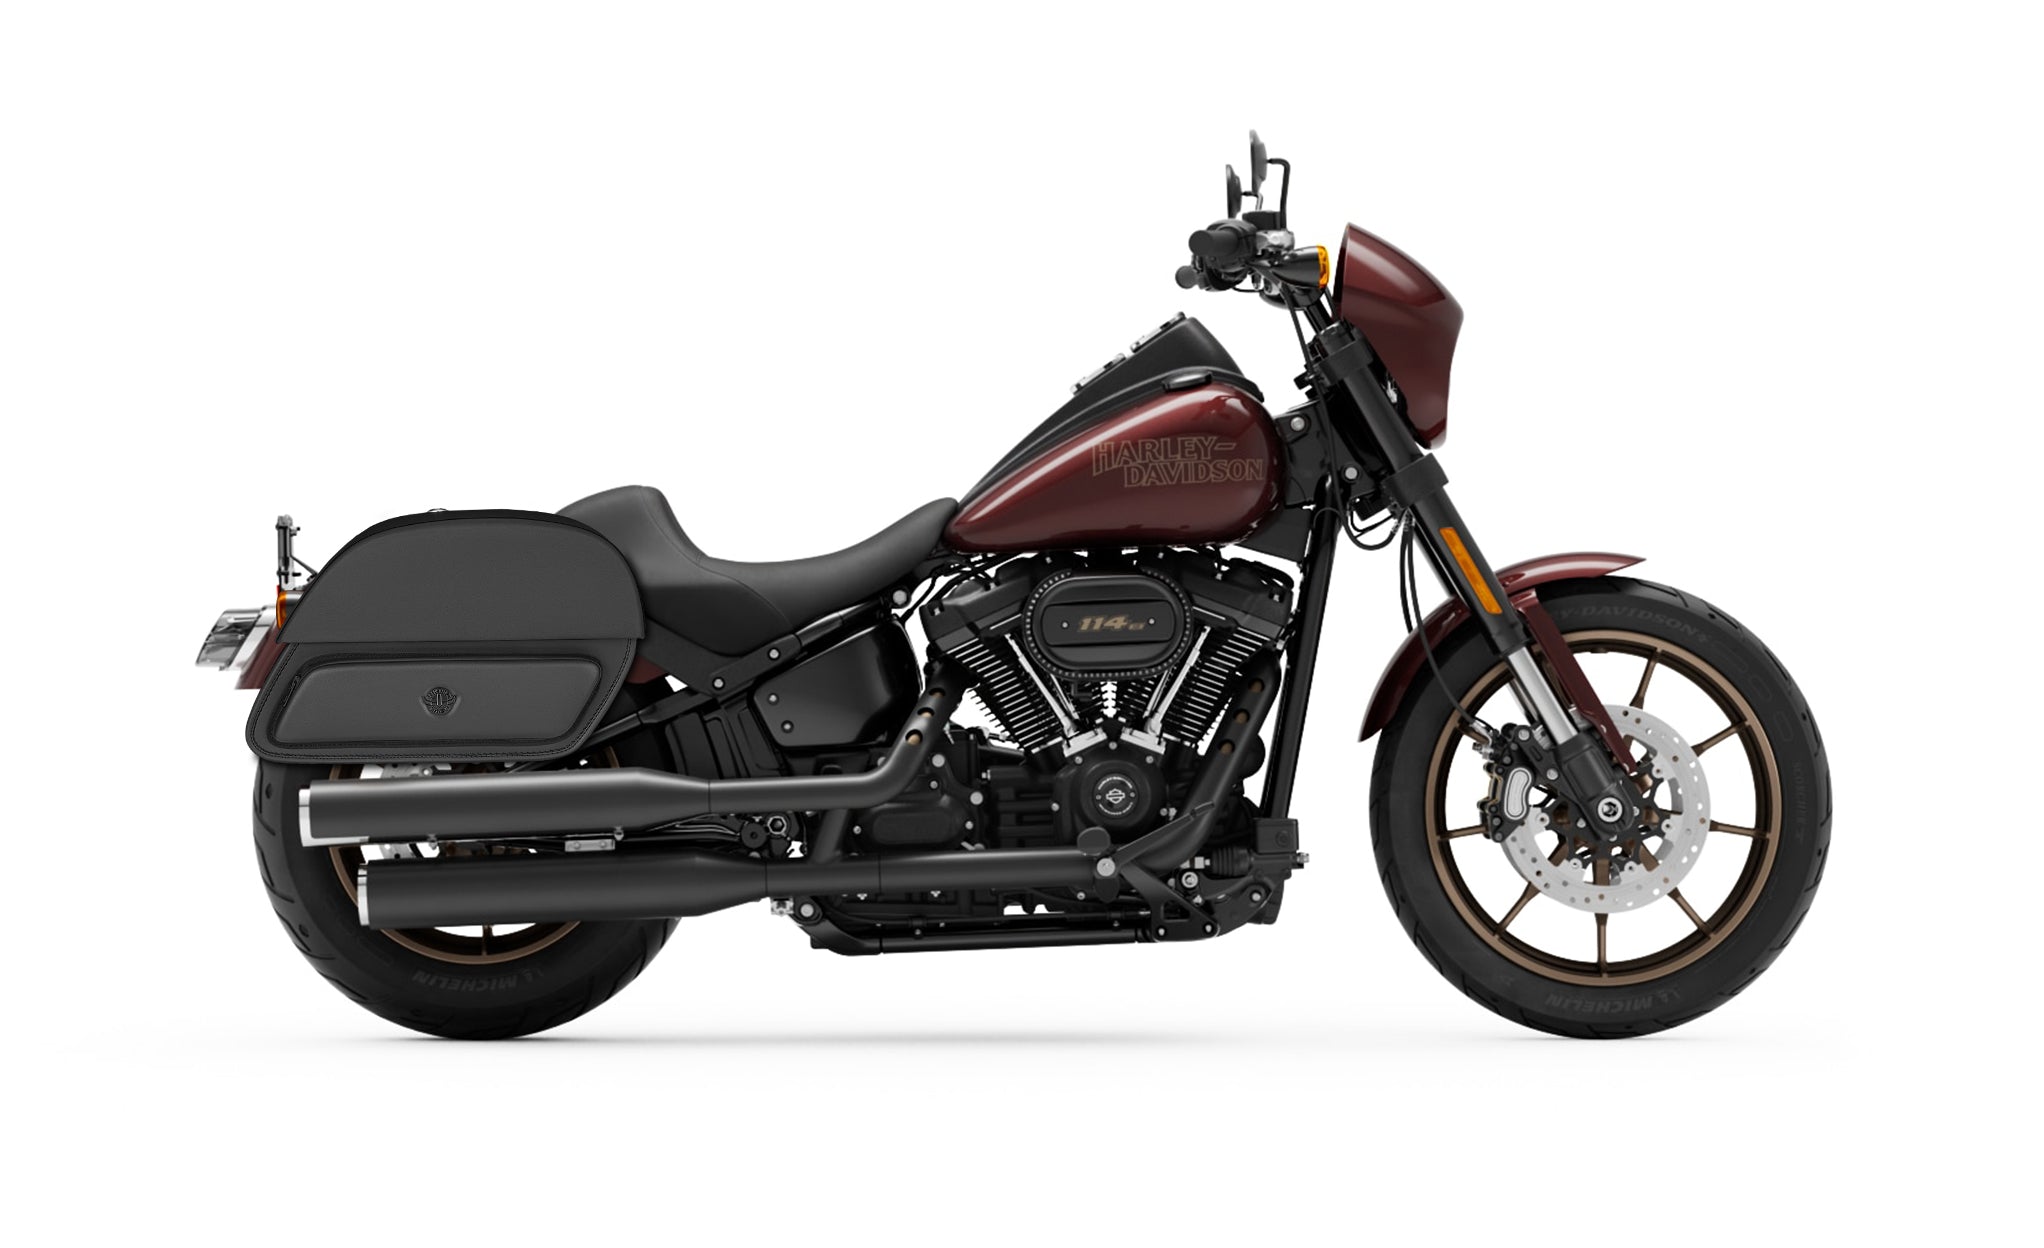 33L - Pantheon Large Motorcycle Saddlebags for Harley Davidson Softail Low Rider S FXLRS on Bike Photo @expand